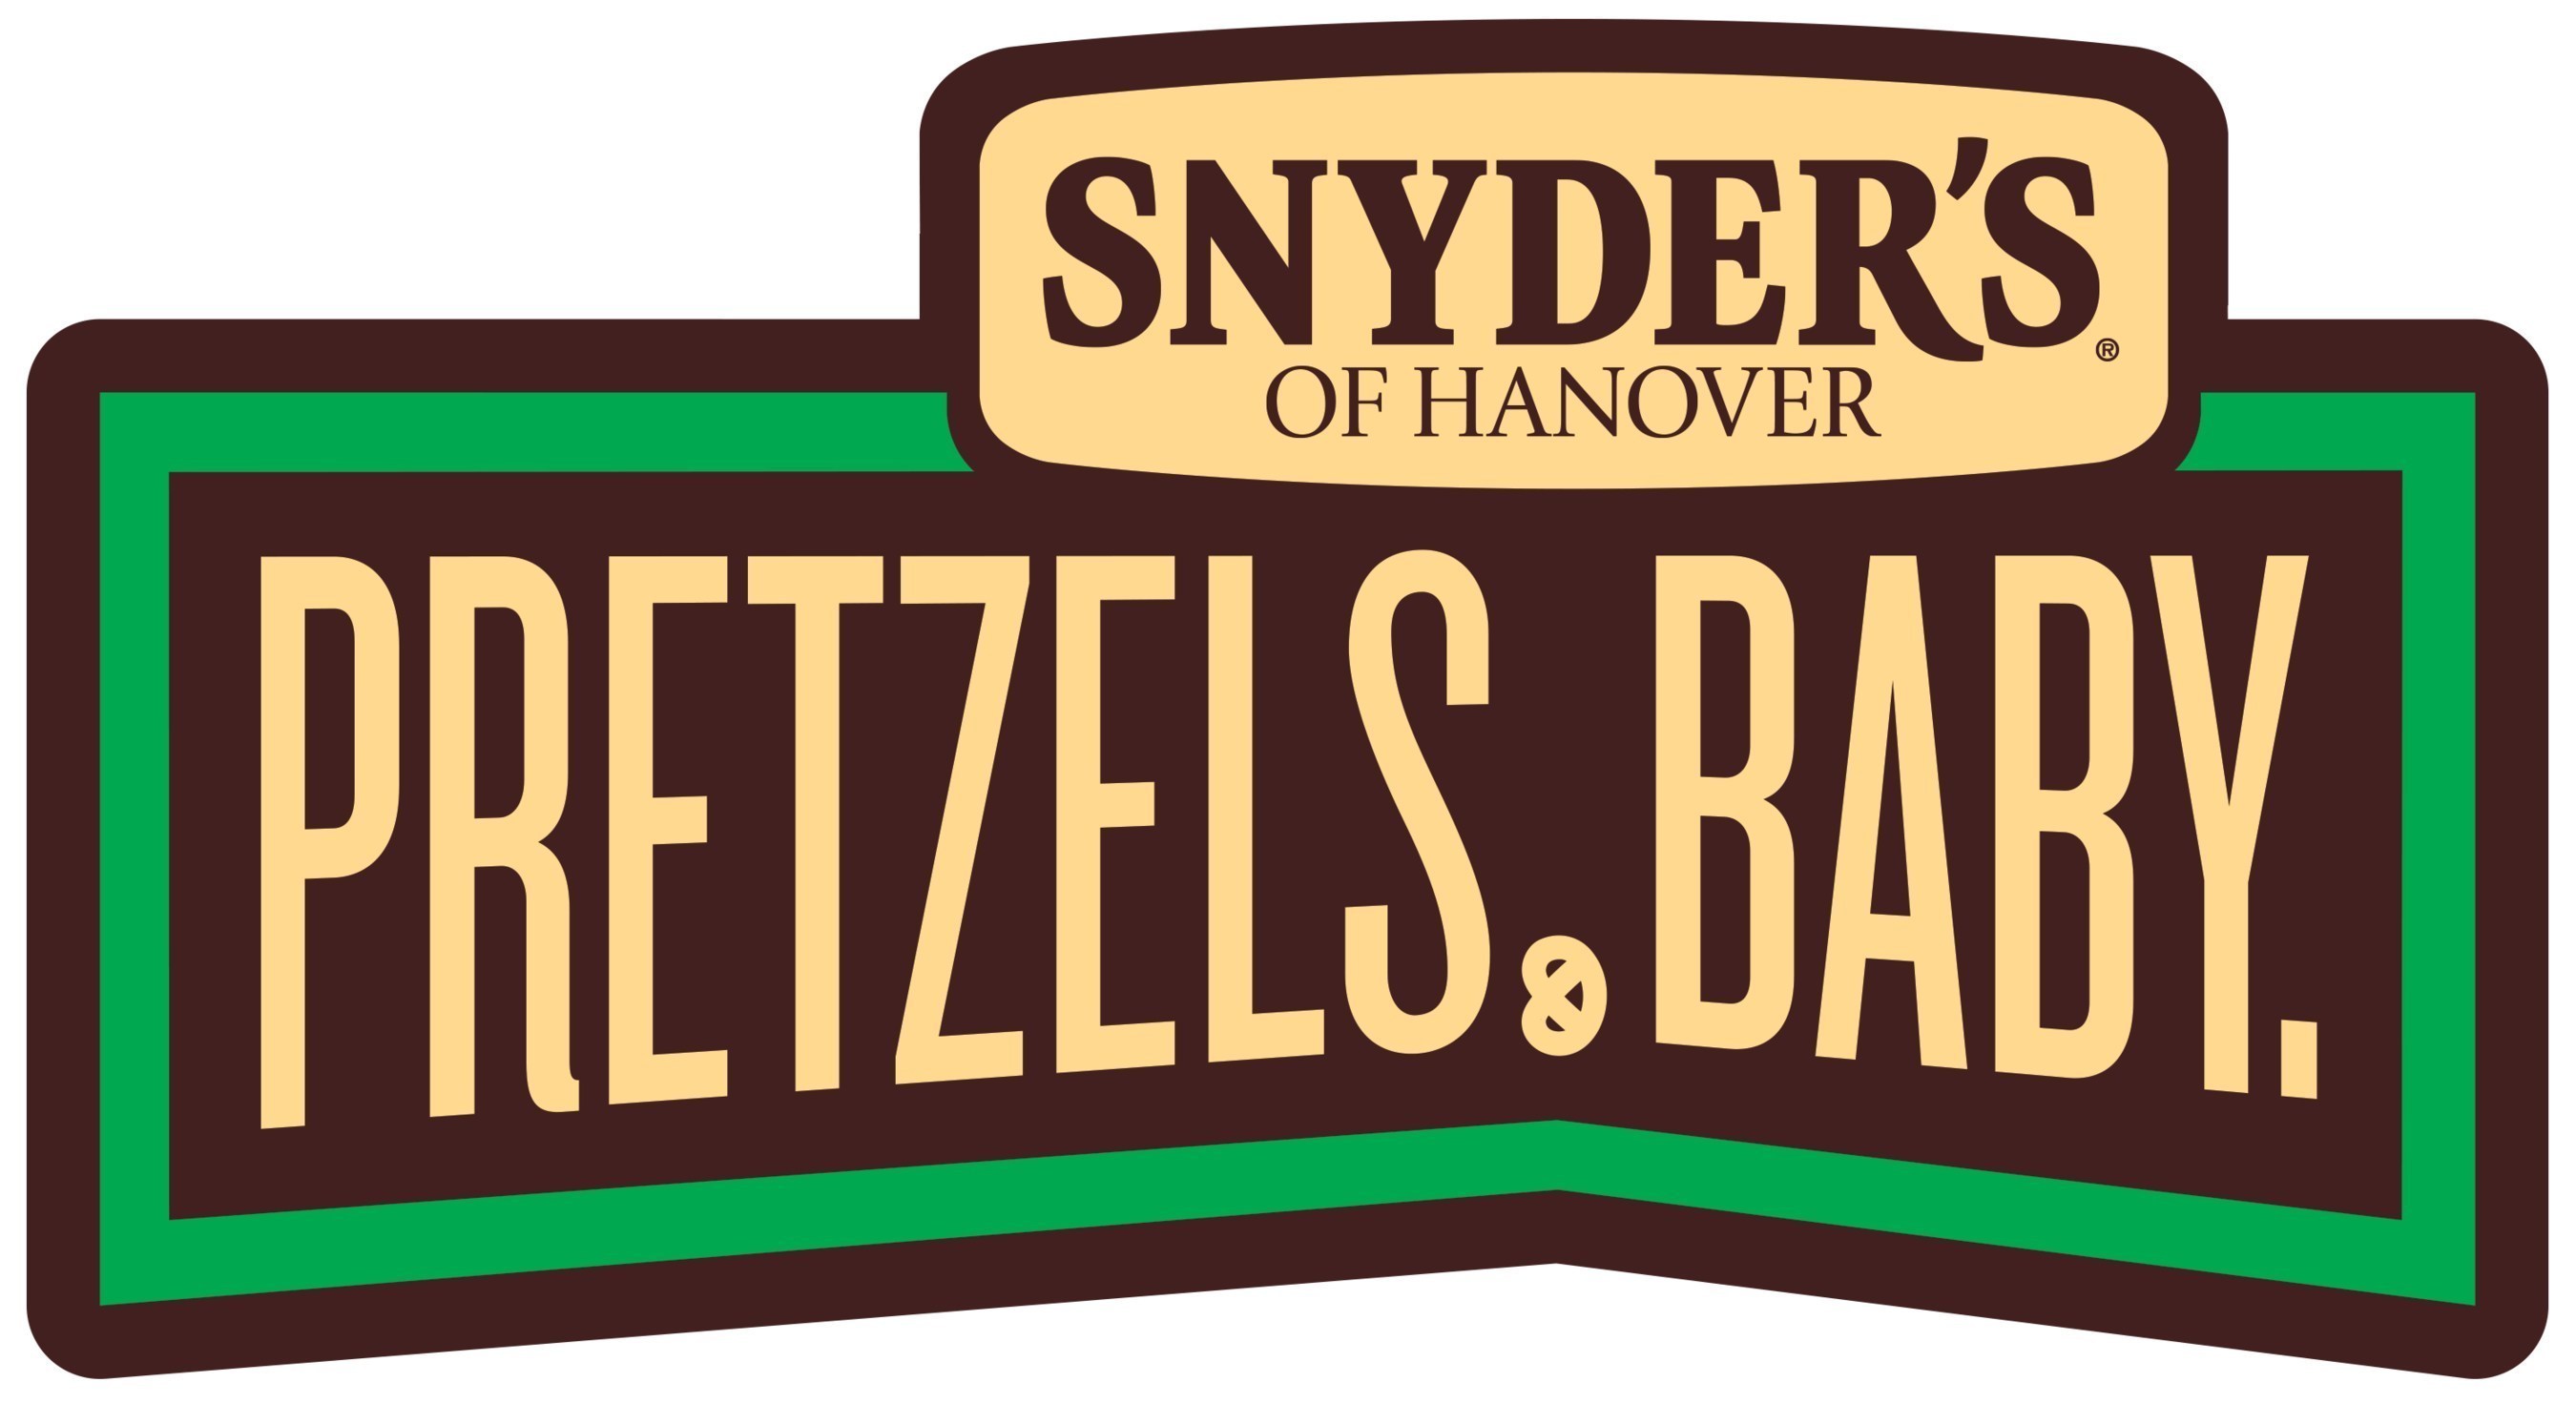 Snyder's of Hanover celebrates National Pretzel Day on April 26 by giving away thousands of free pretzels across the U.S.